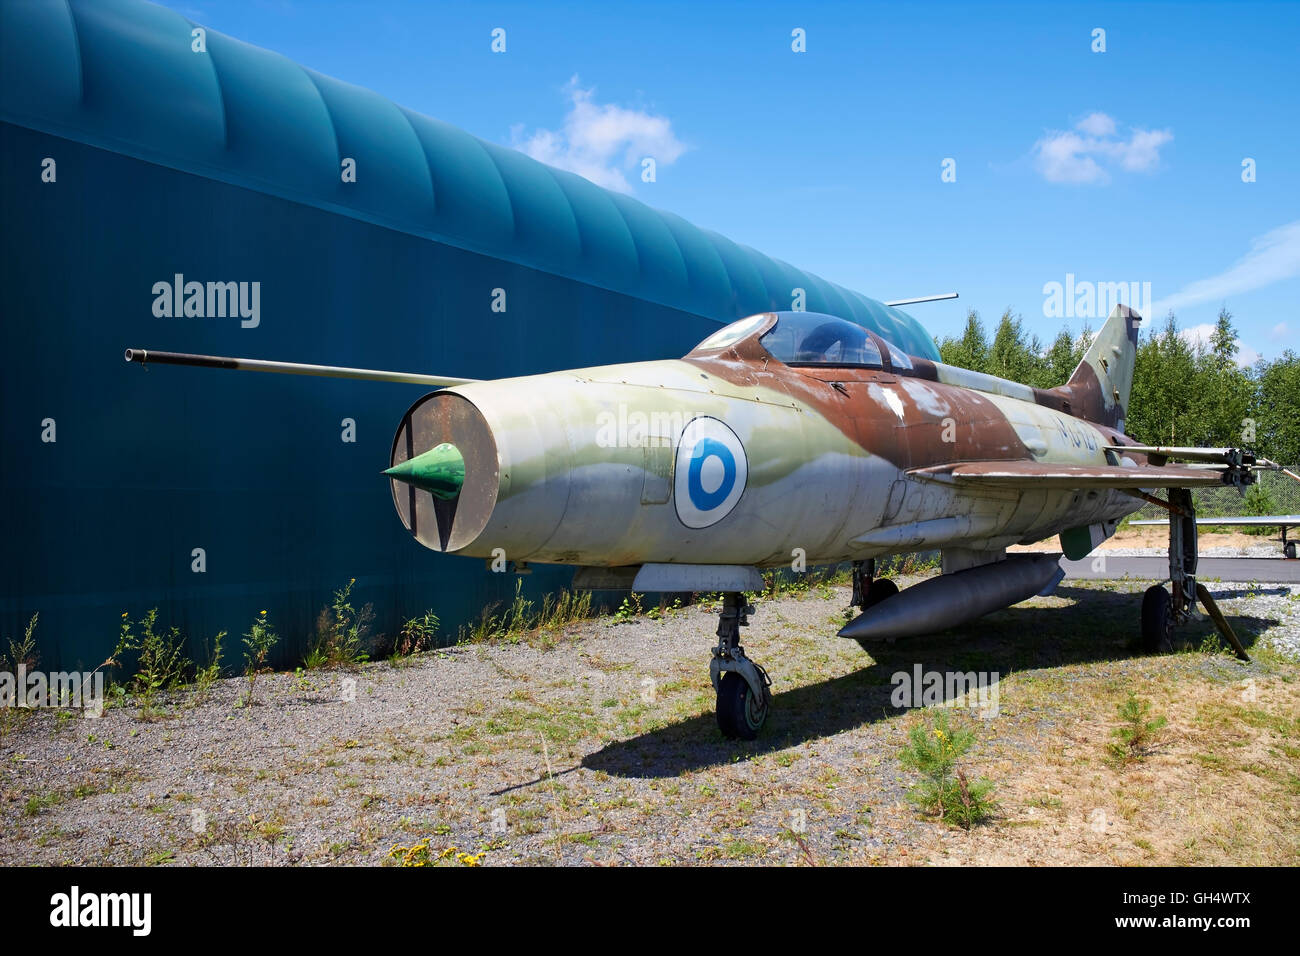 A MIG-21 F 13 jet fighter as decoy plane on ground, Finland Stock Photo